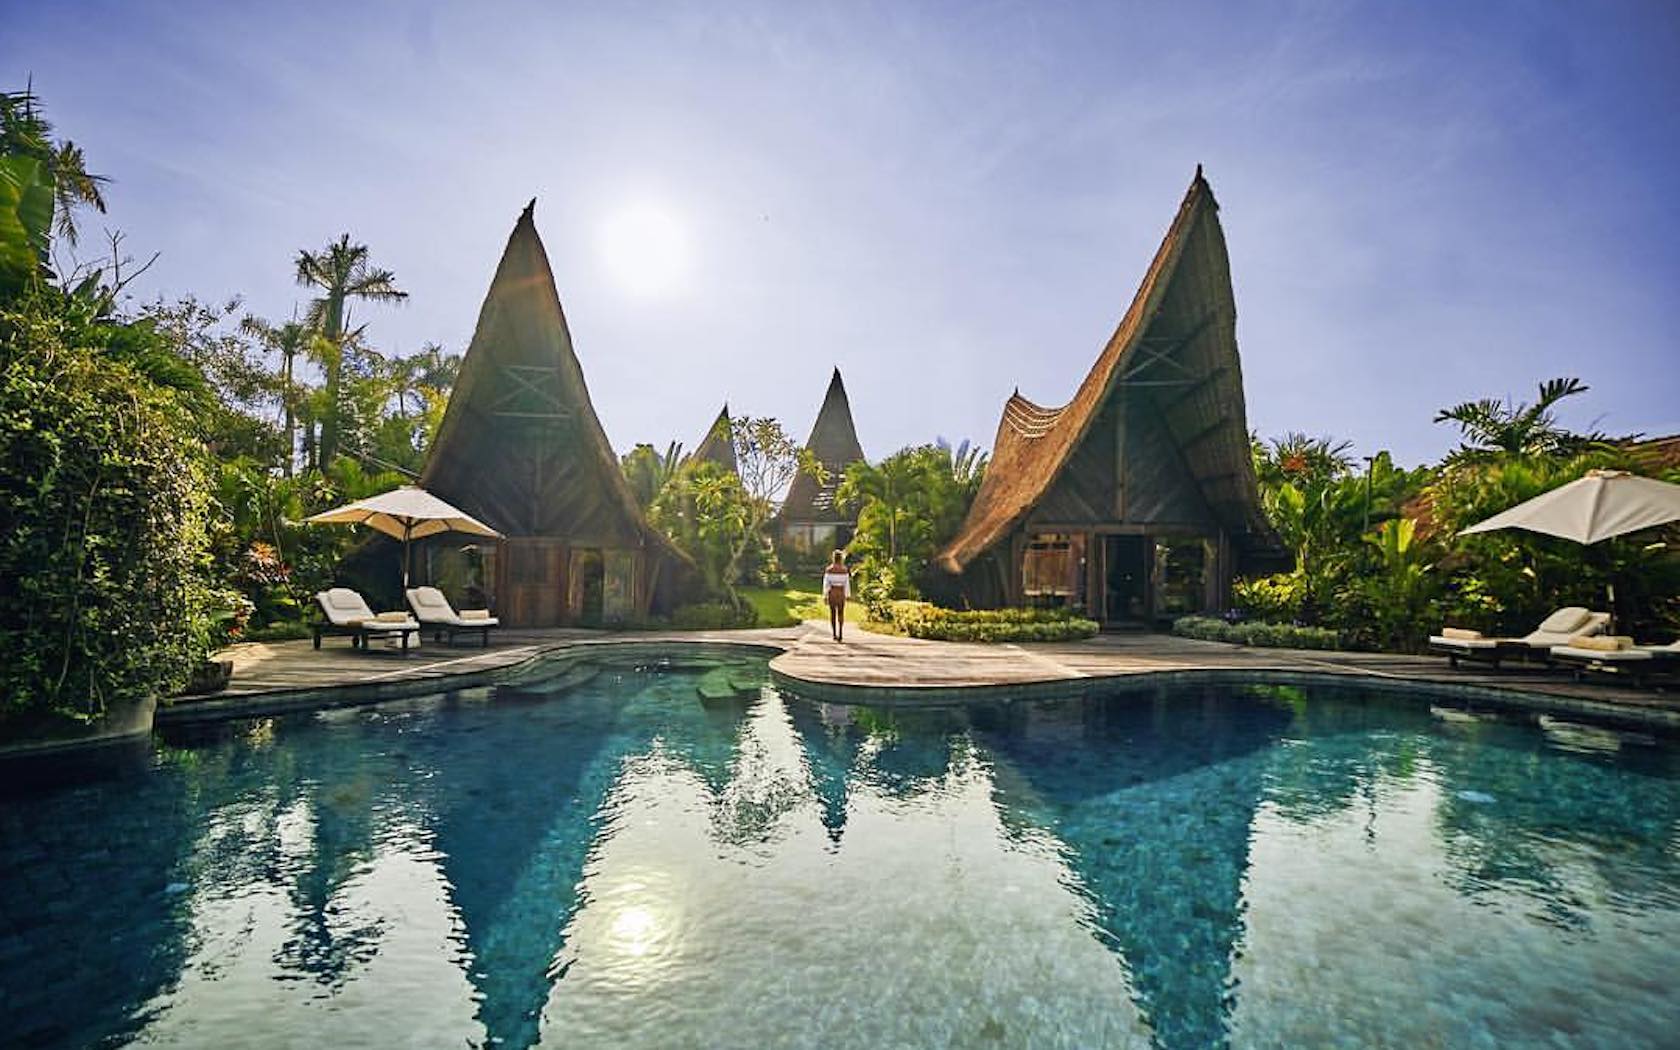 Bali S Own Villa Accommodation Is The Only Way To See Seminyak